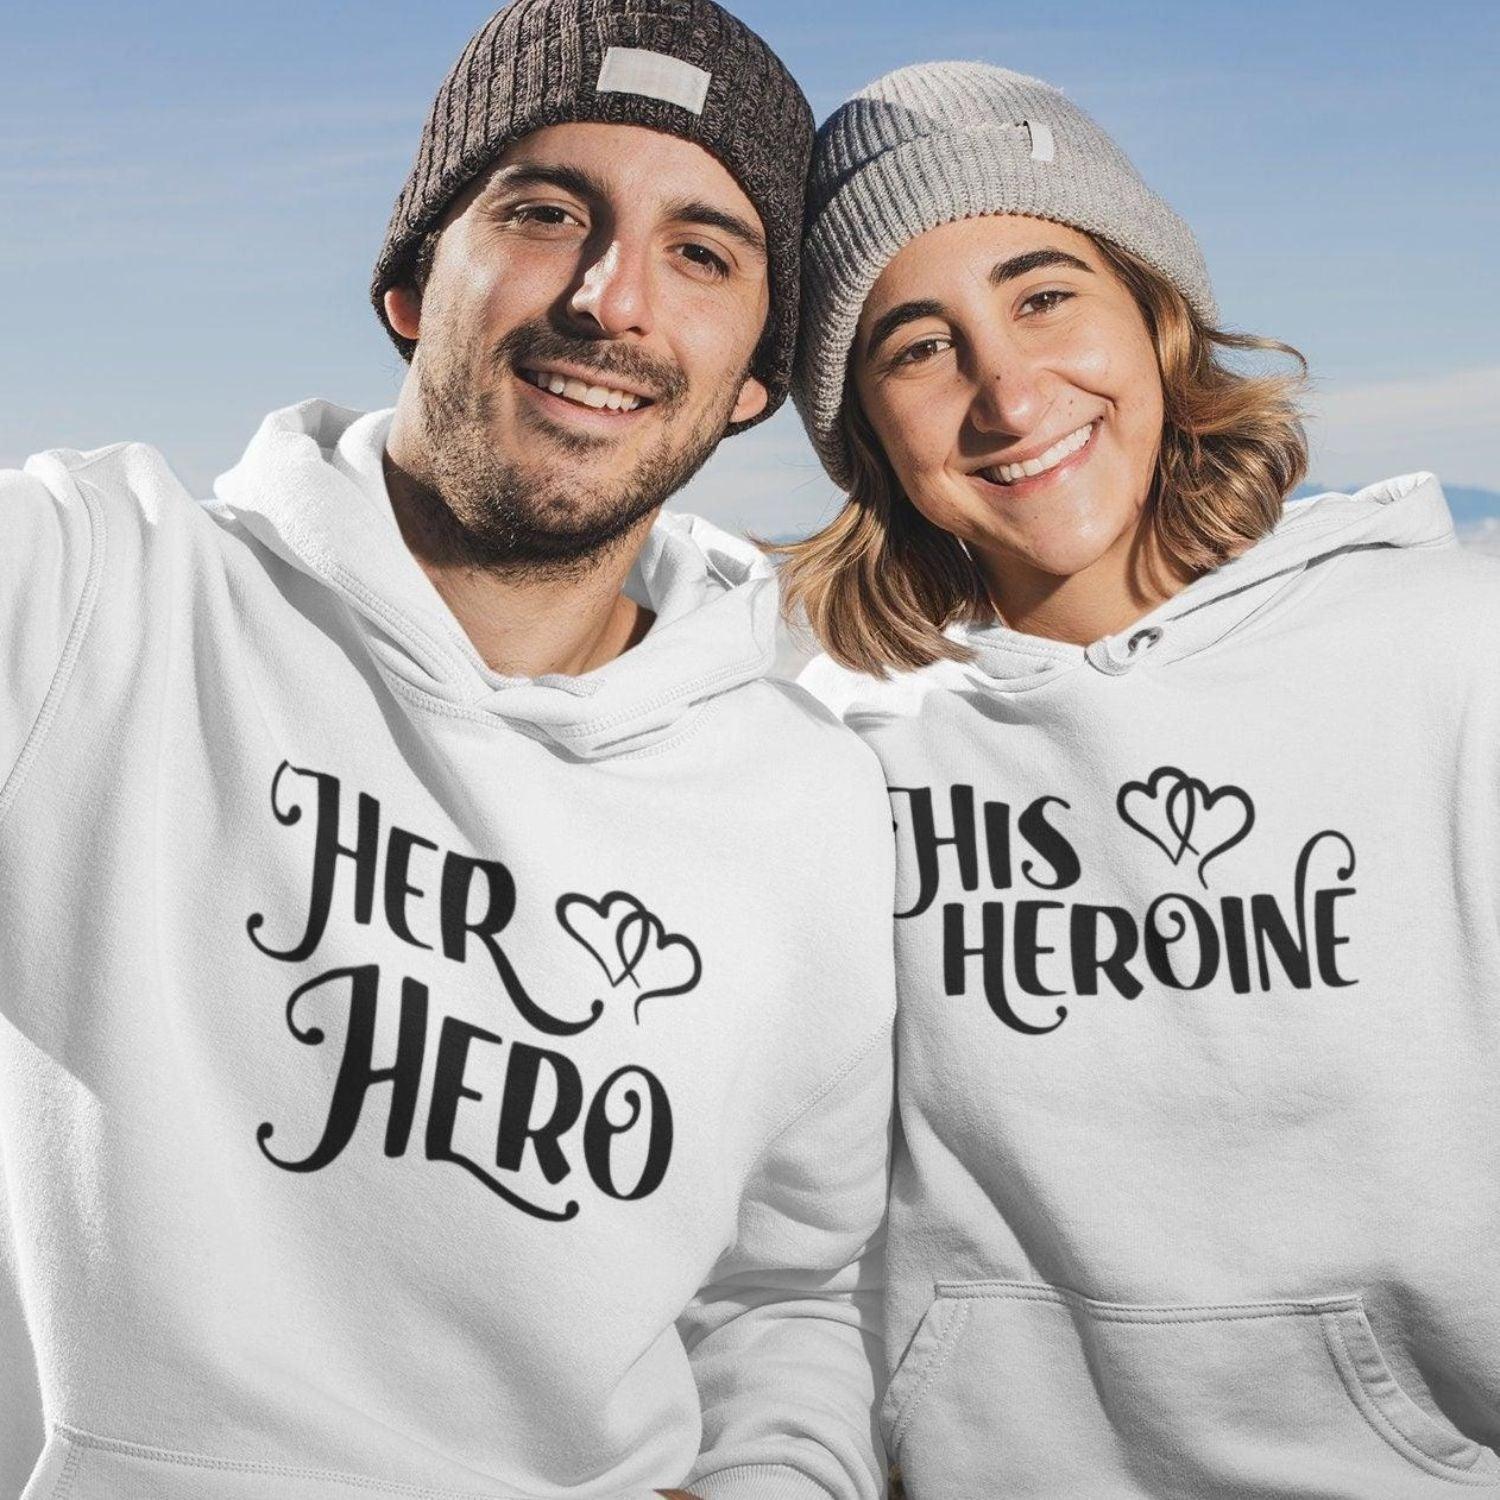 His Heroine & Her Hero: Adorable Matching Outfits for Couples – Perfect Love Statement Sweatshirts